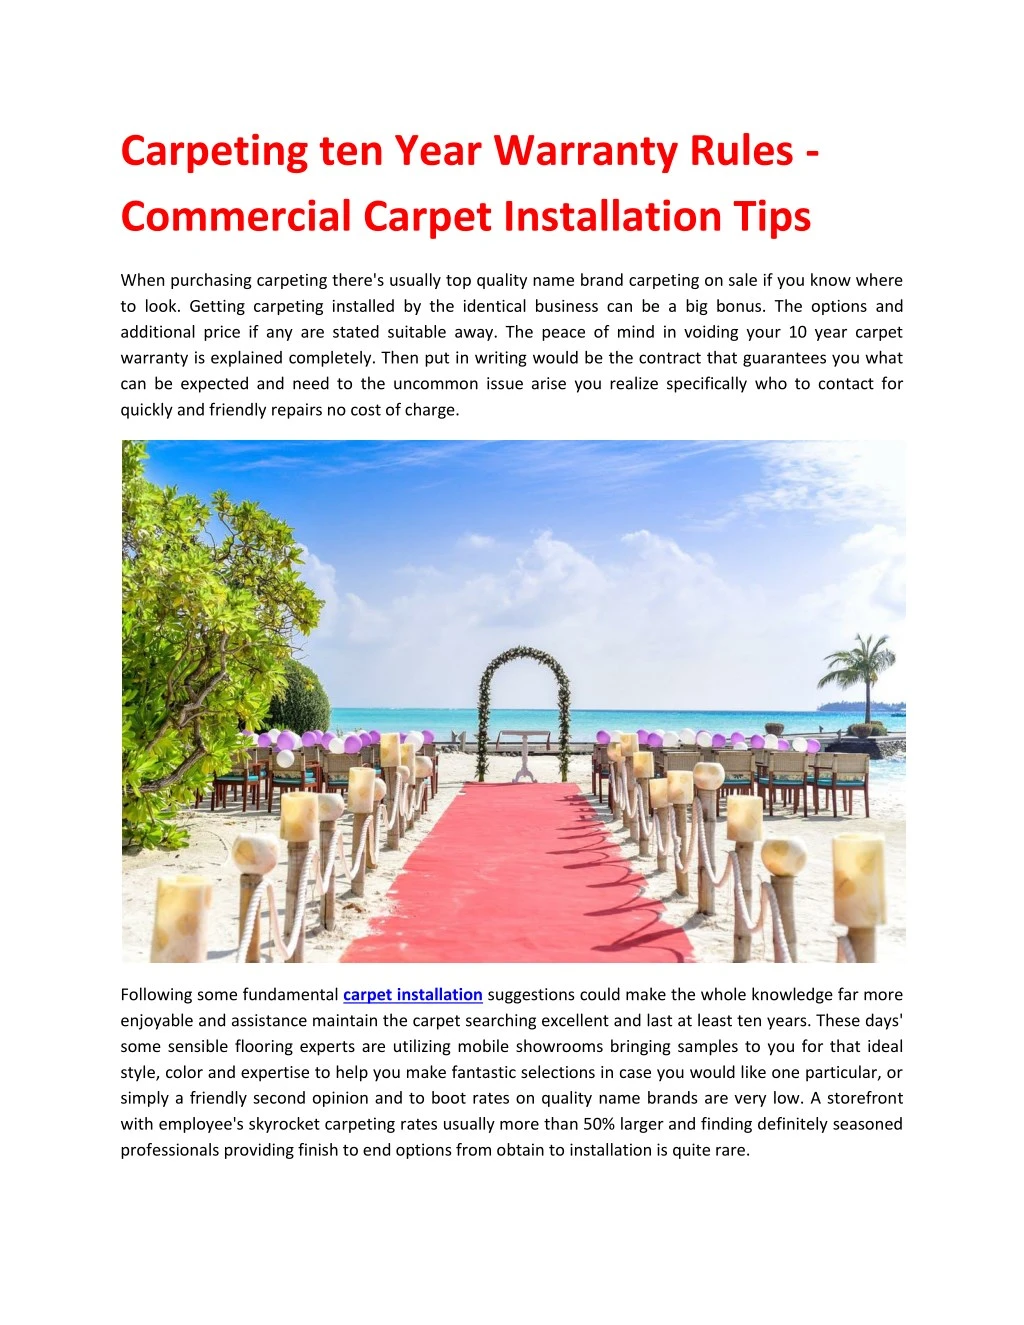 carpeting ten year warranty rules commercial